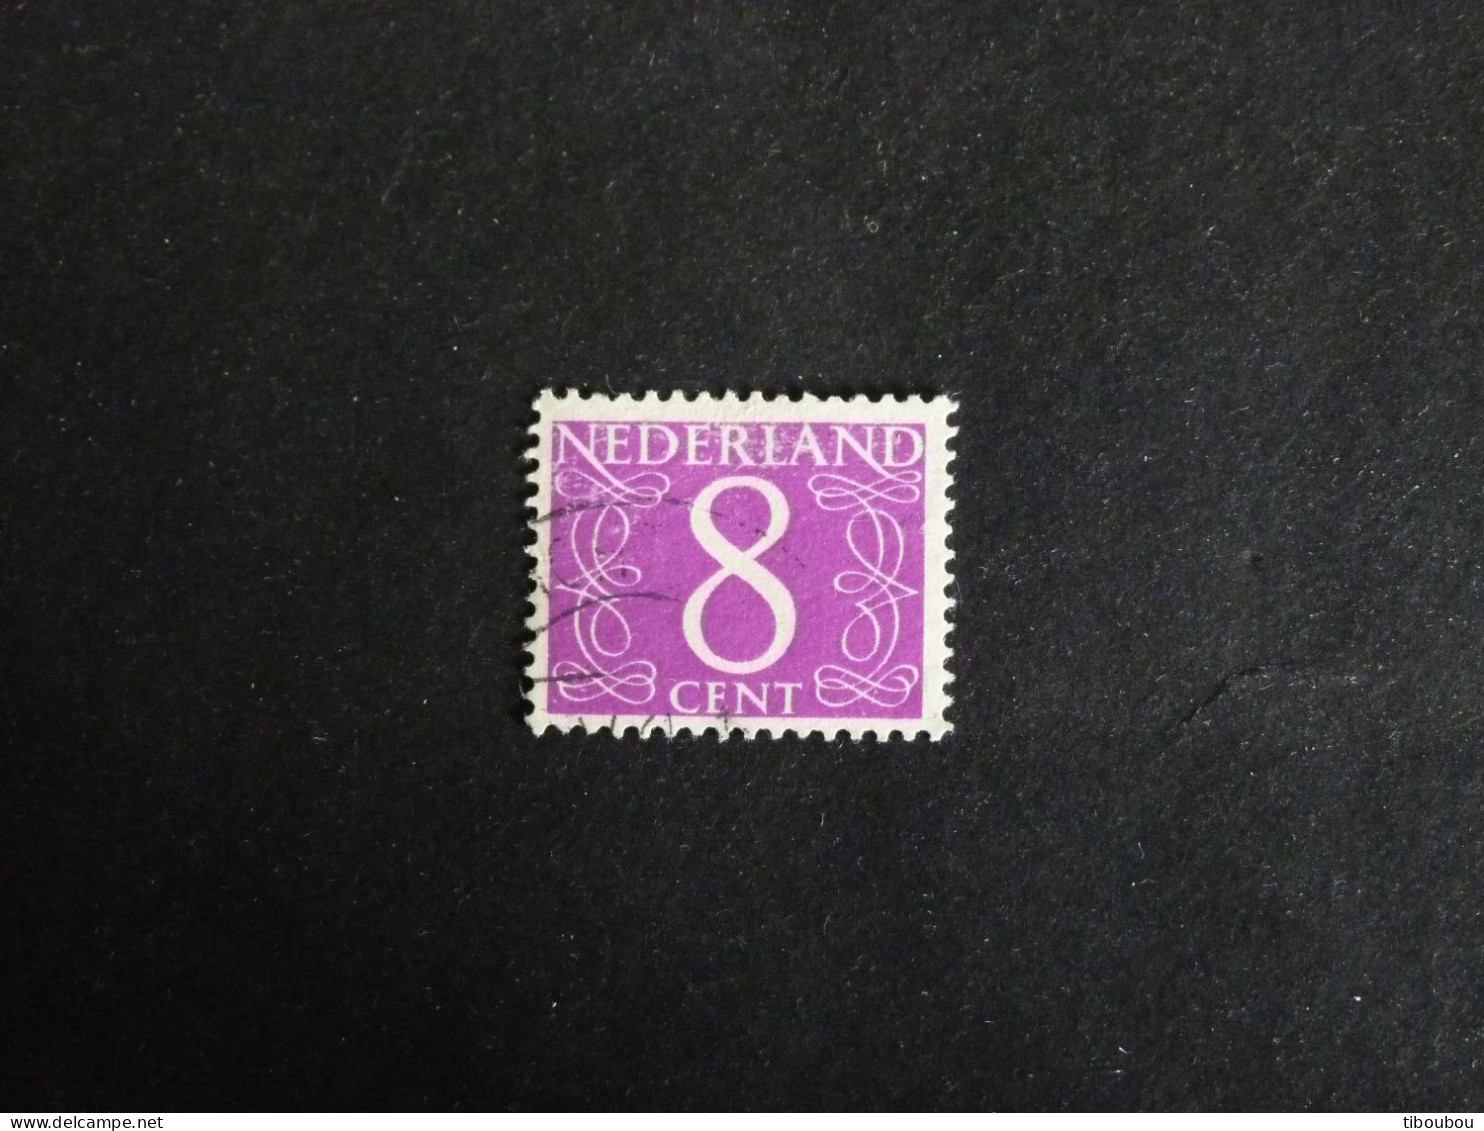 PAYS BAS NEDERLAND YT 612A OBLITERE - CHIFFRE - Used Stamps